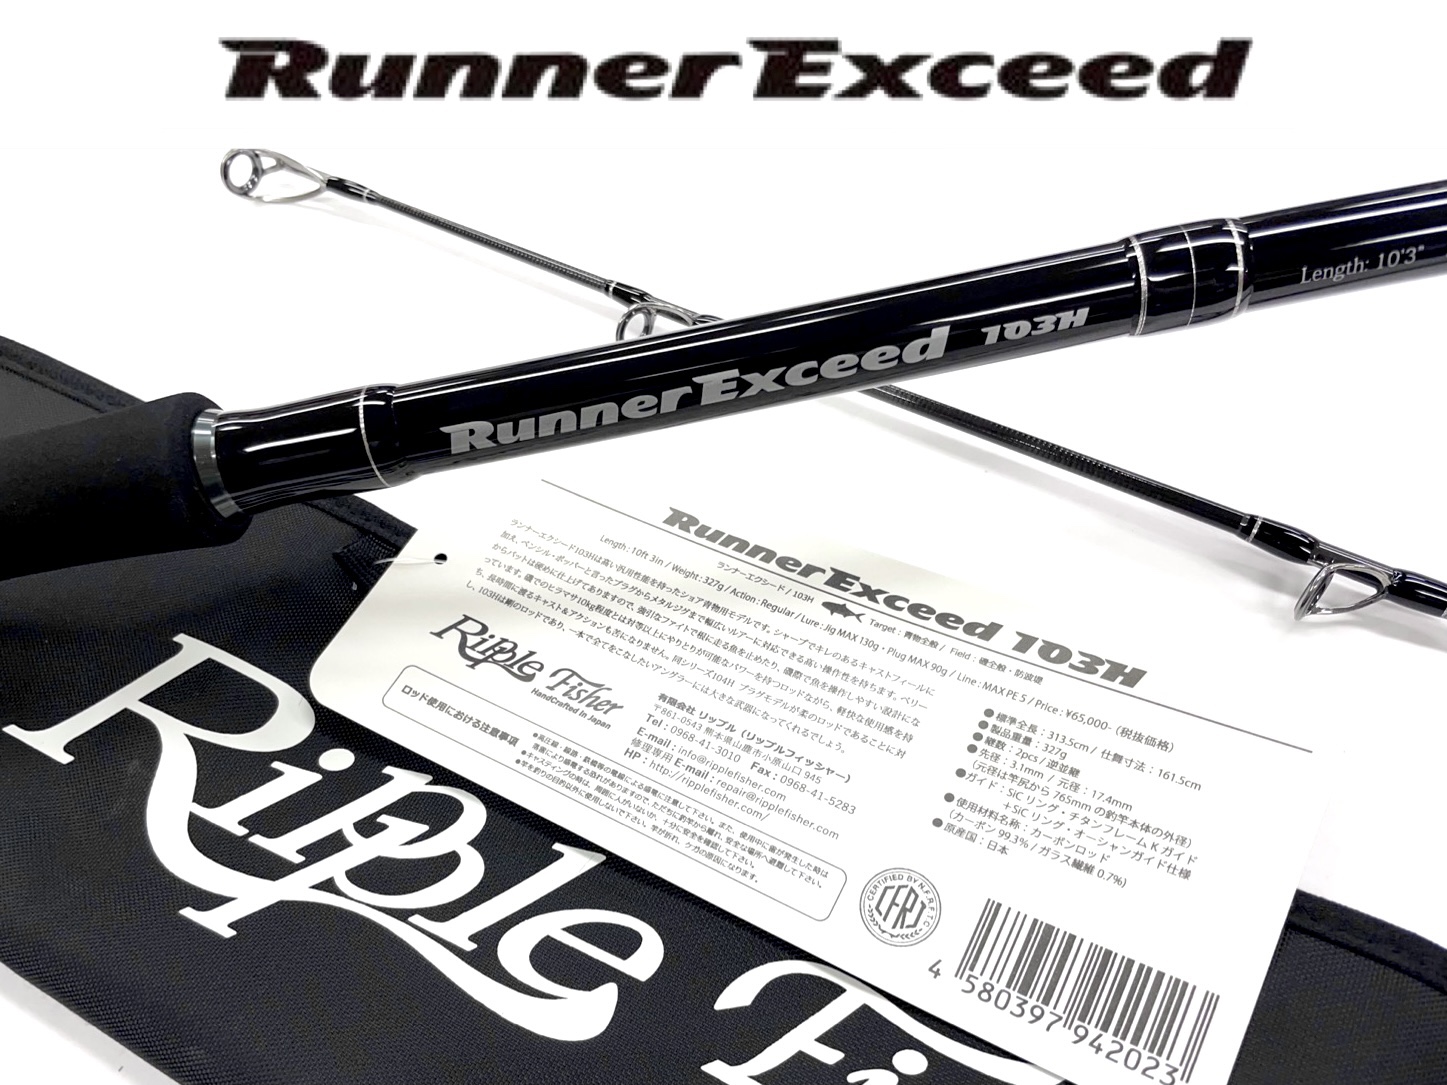 Ripple Fisher【Runner Exceed 103H】 – サンスイ渋谷店 Part 1&Part 2 